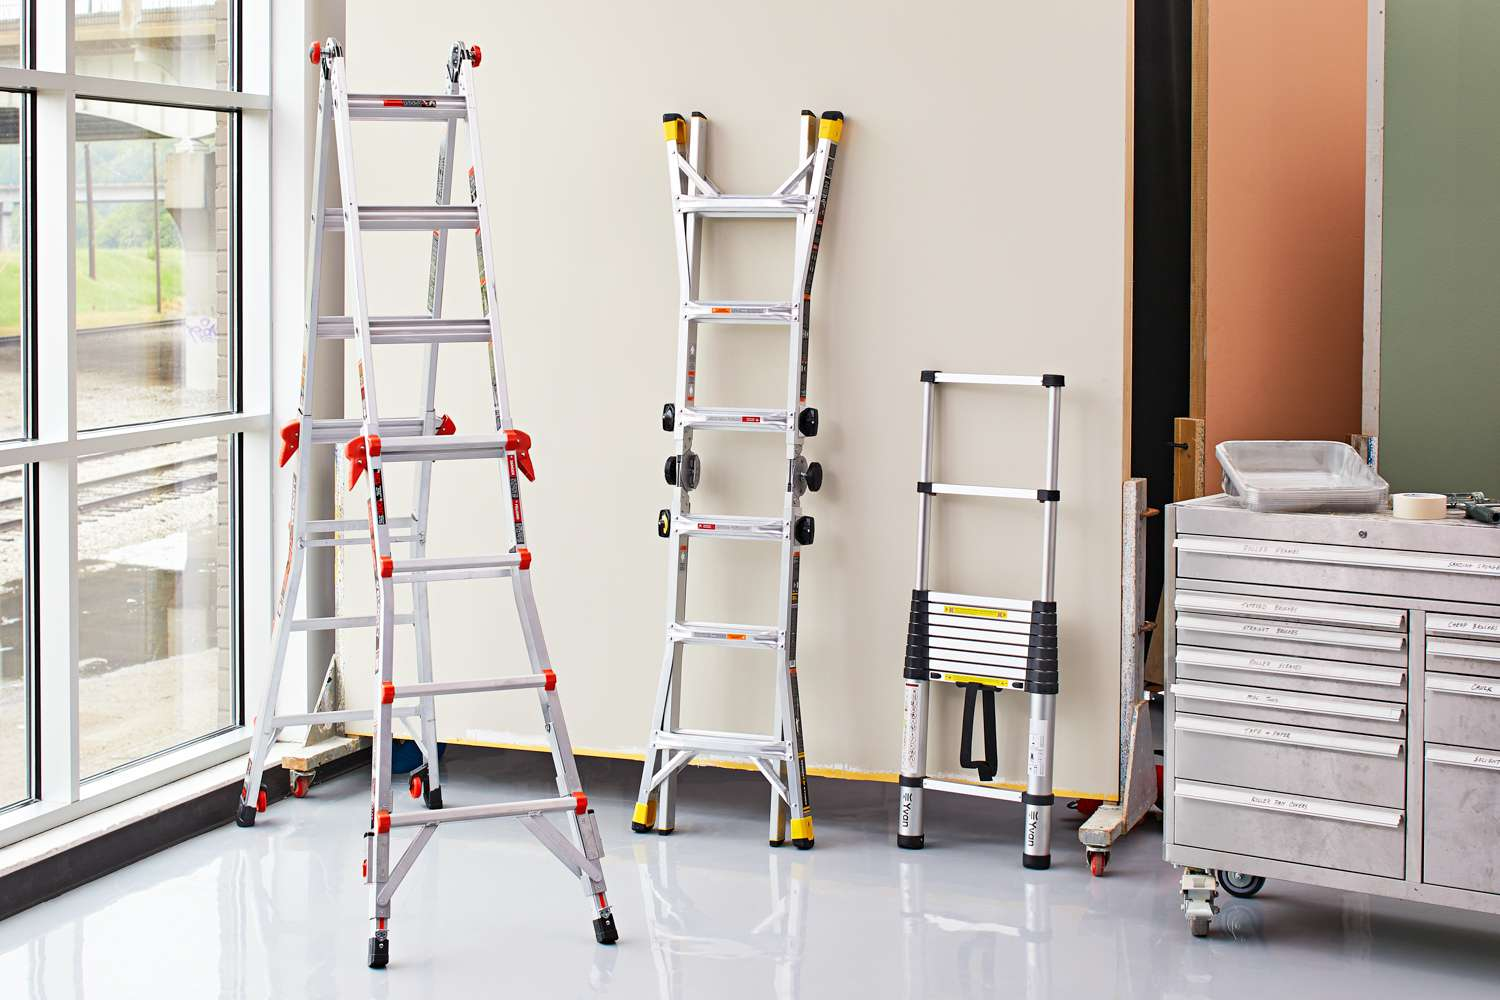 Trusted retailers and suppliers of commercial ladders